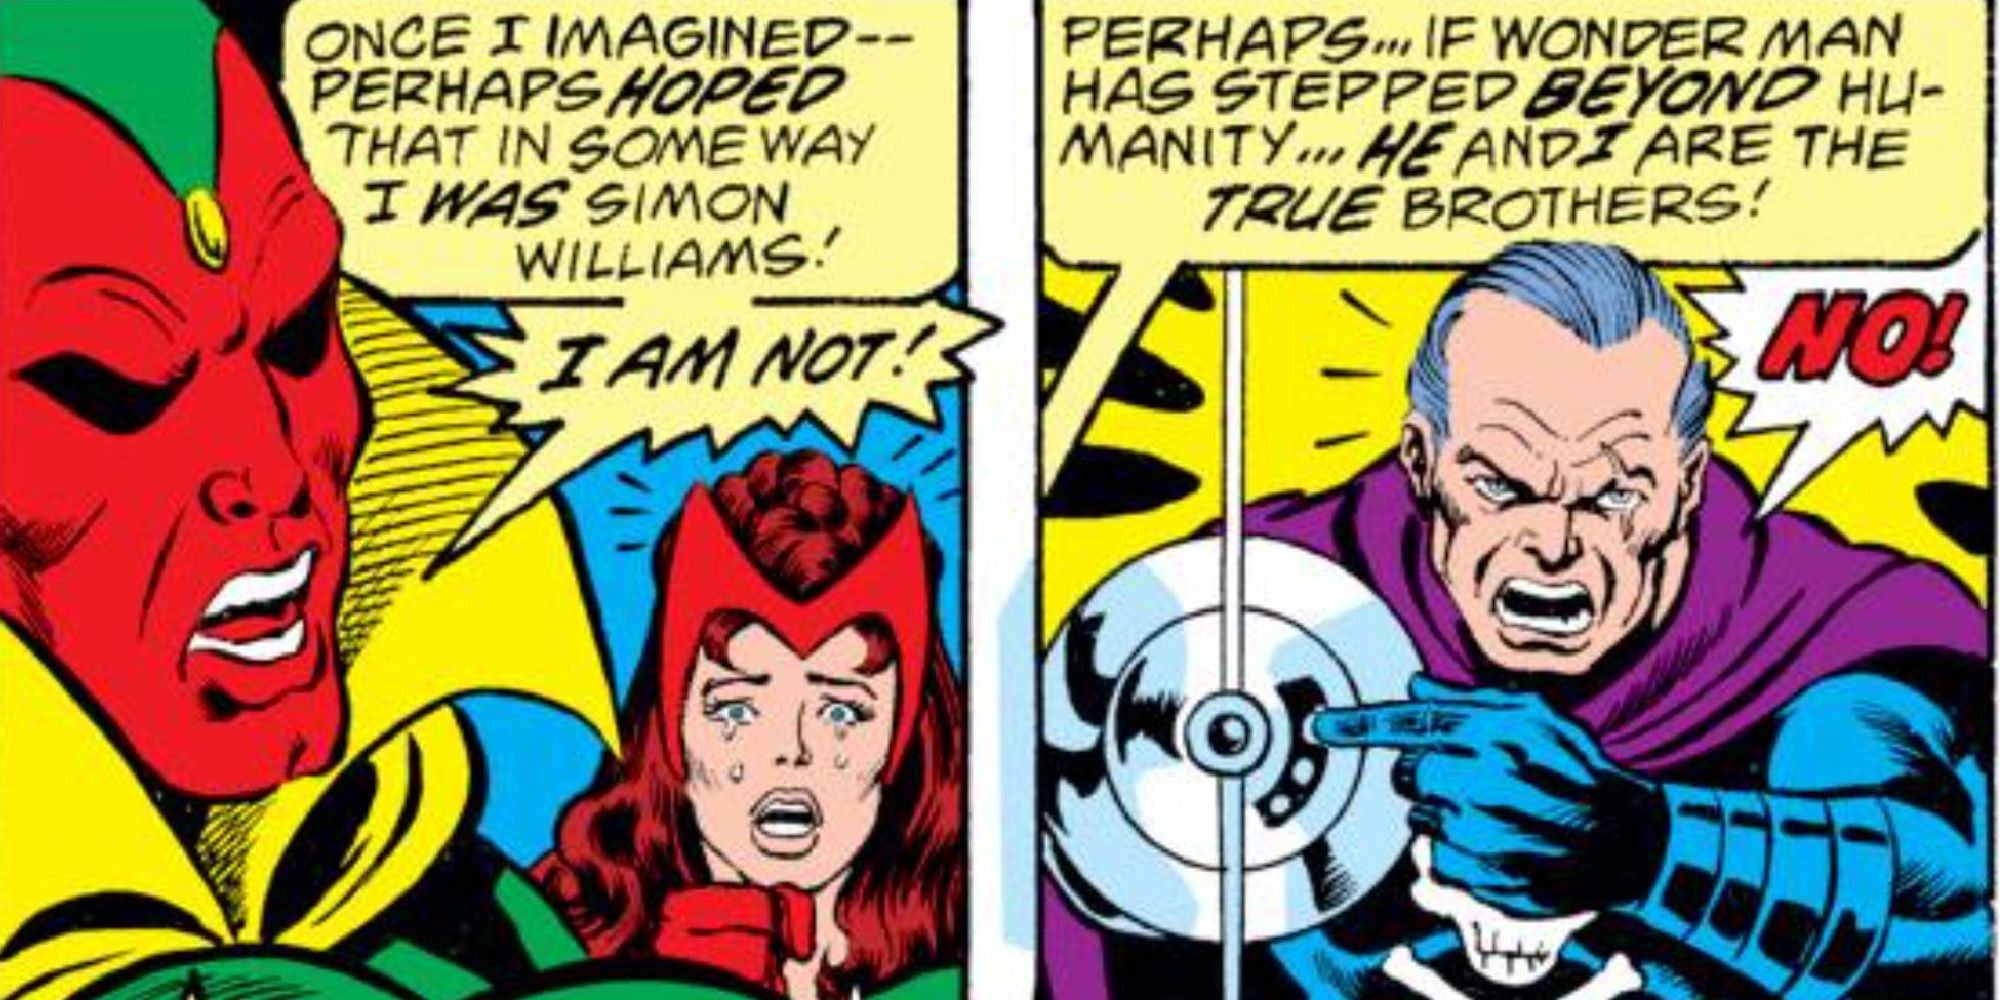 The Vision rejects being Wonder Man in Marvel Comics.